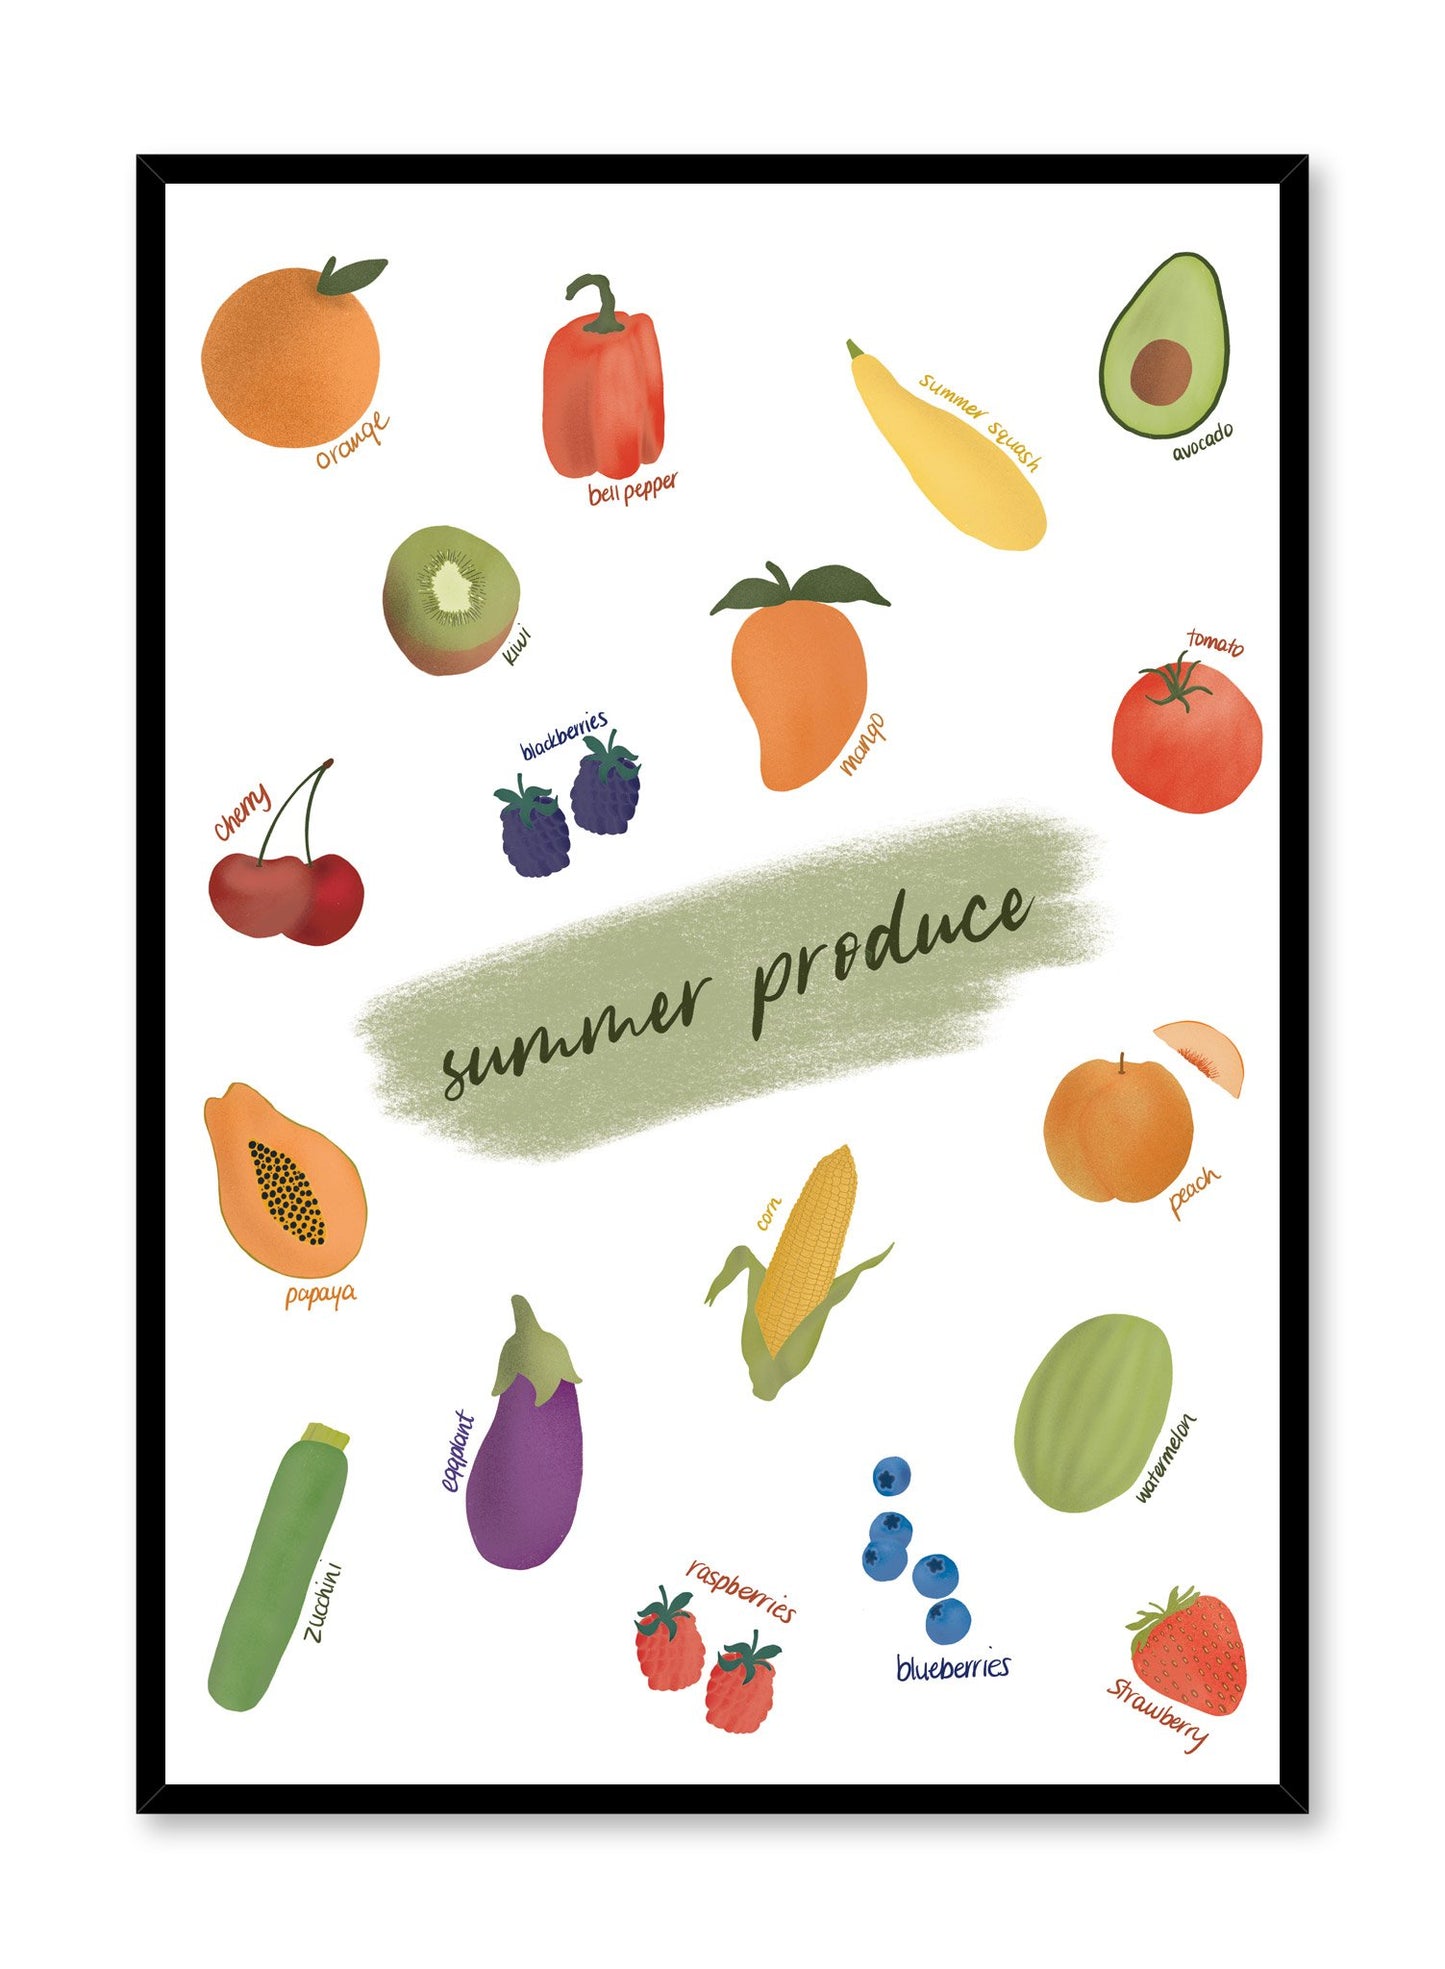 Summer Produce is an illustrated seasonal fruit and vegetable harvest guide poster by Opposite Wall.